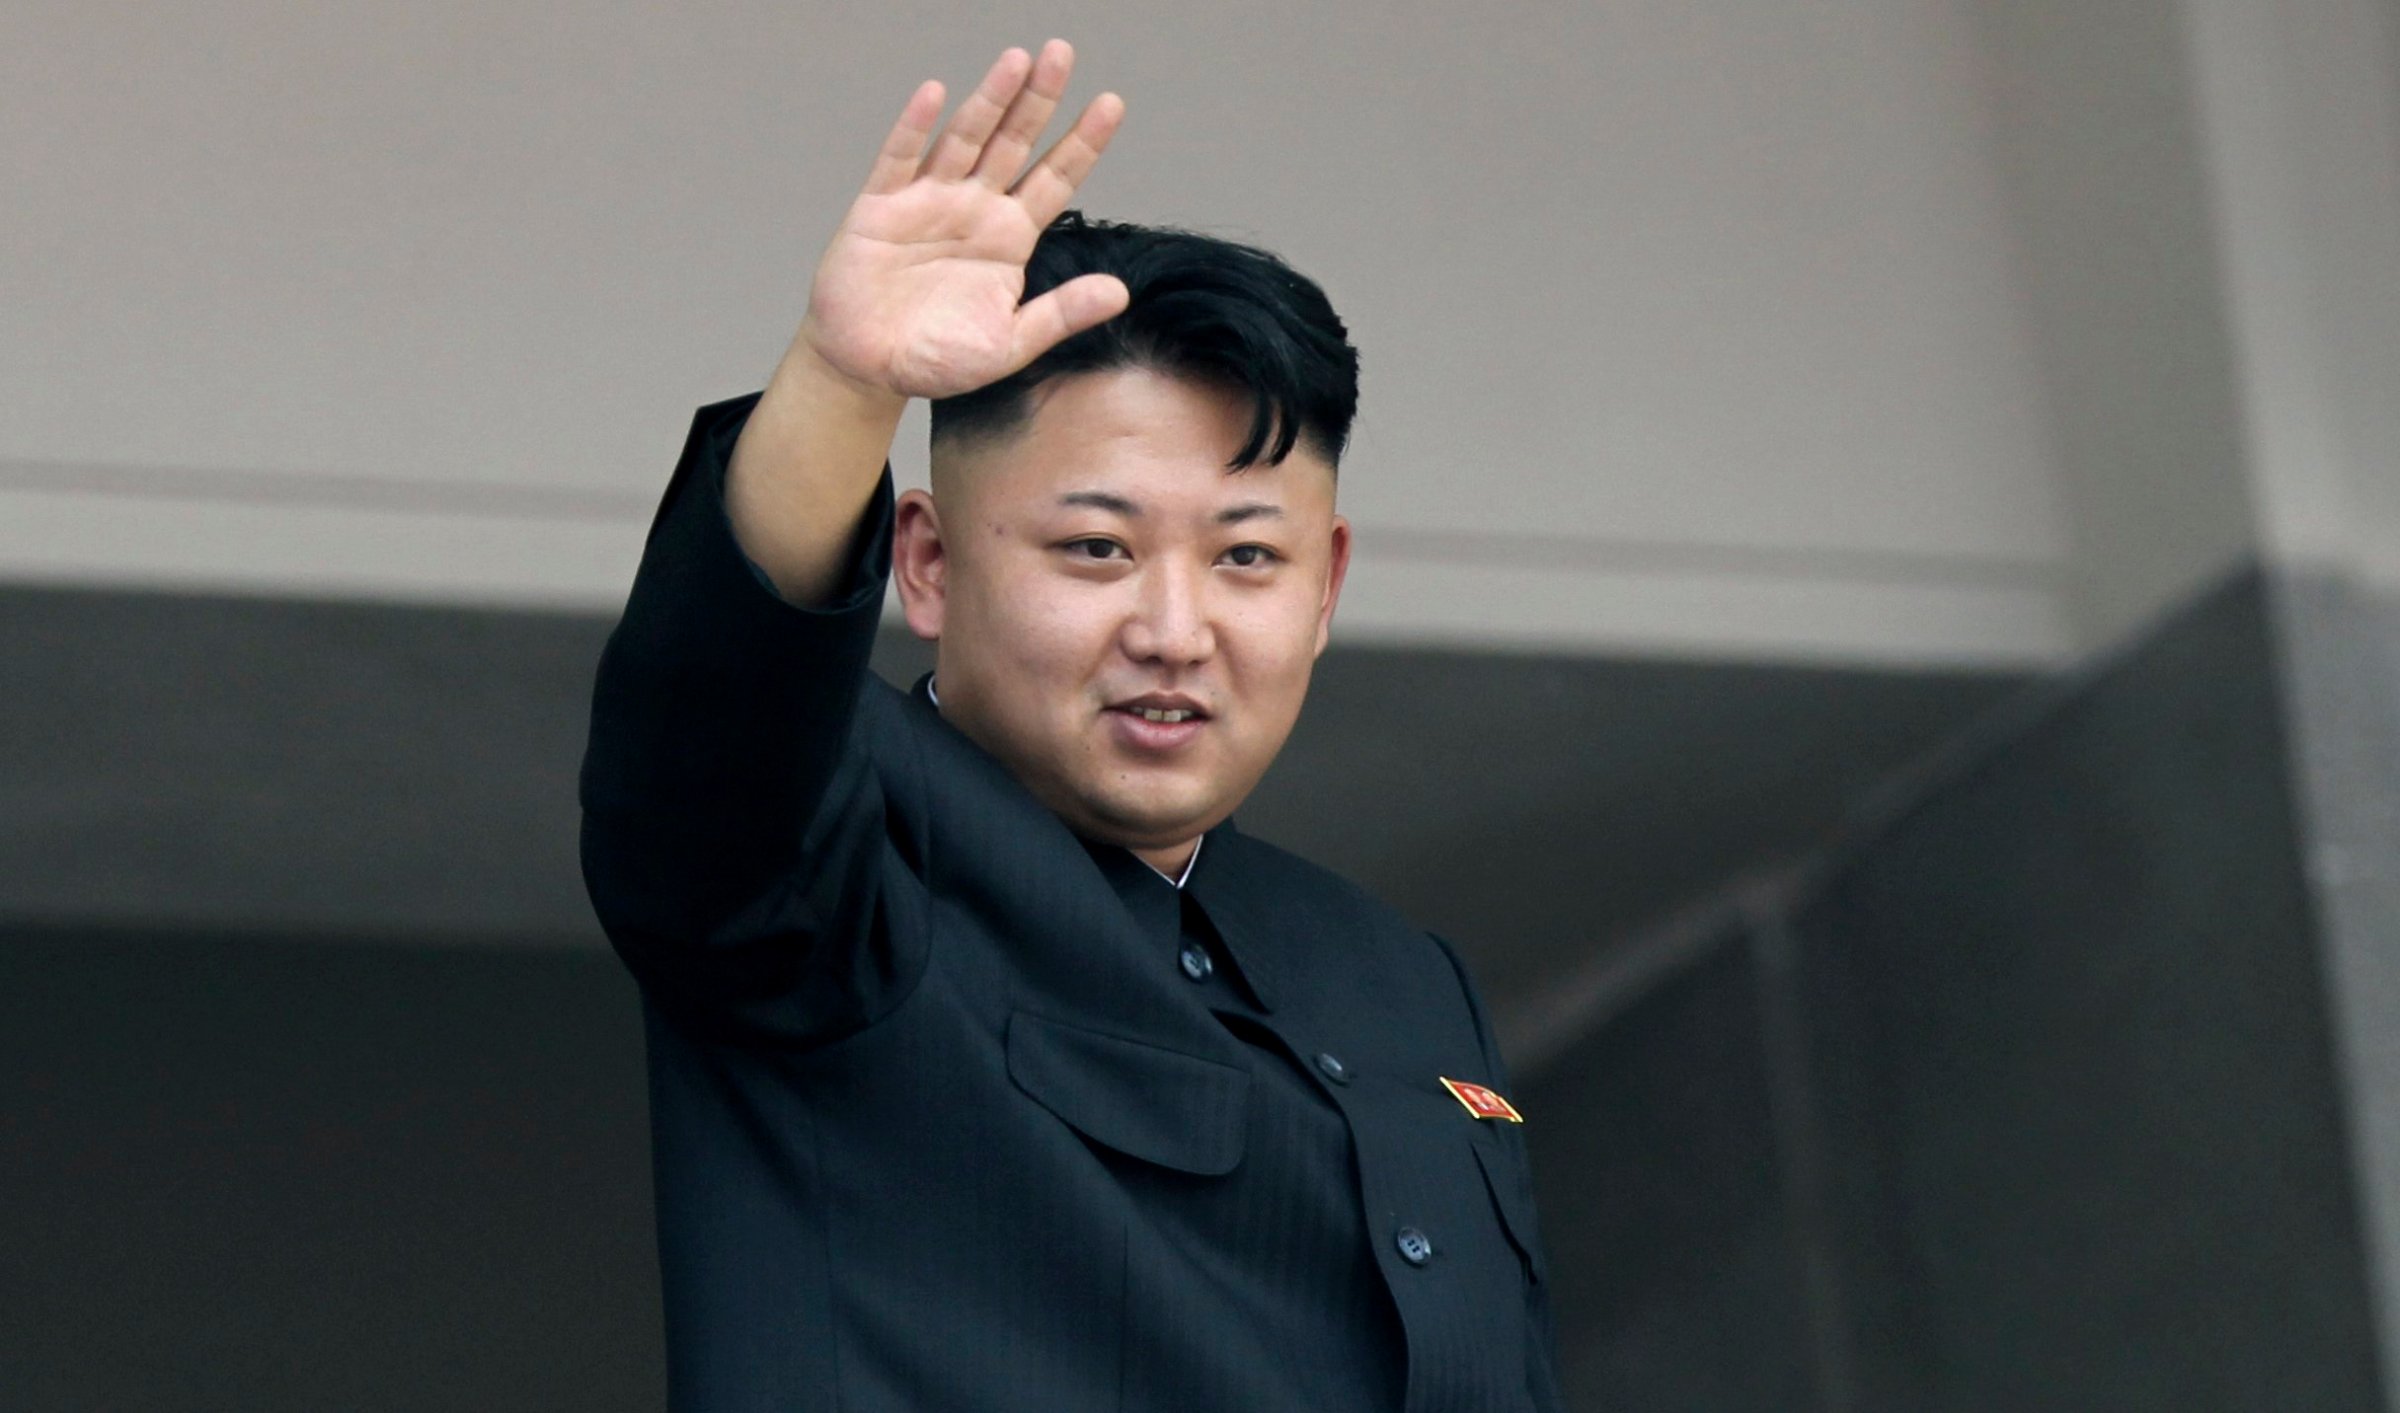 Kim Jong Un waves to spectators and participants of a mass military parade celebrating the 60th anniversary of the Korean War armistice in Pyongyang on July 27, 2013.